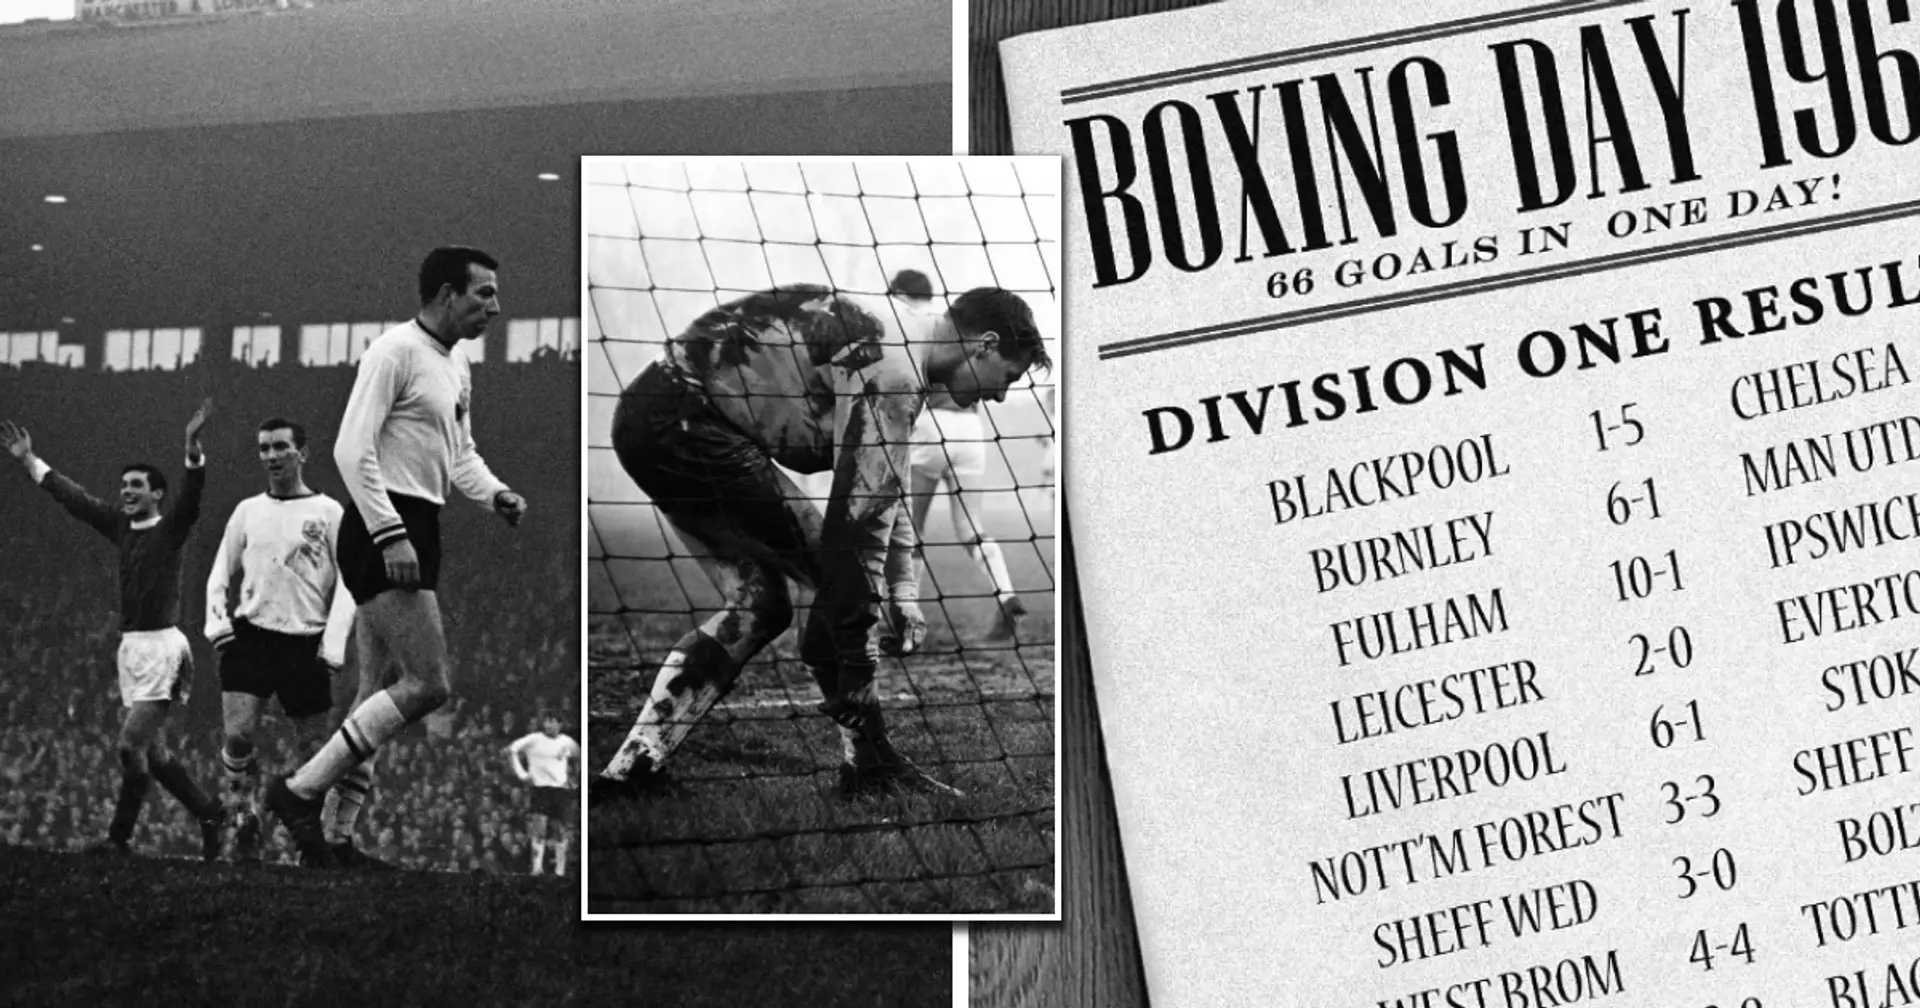 What happened on Boxing Day 1963?